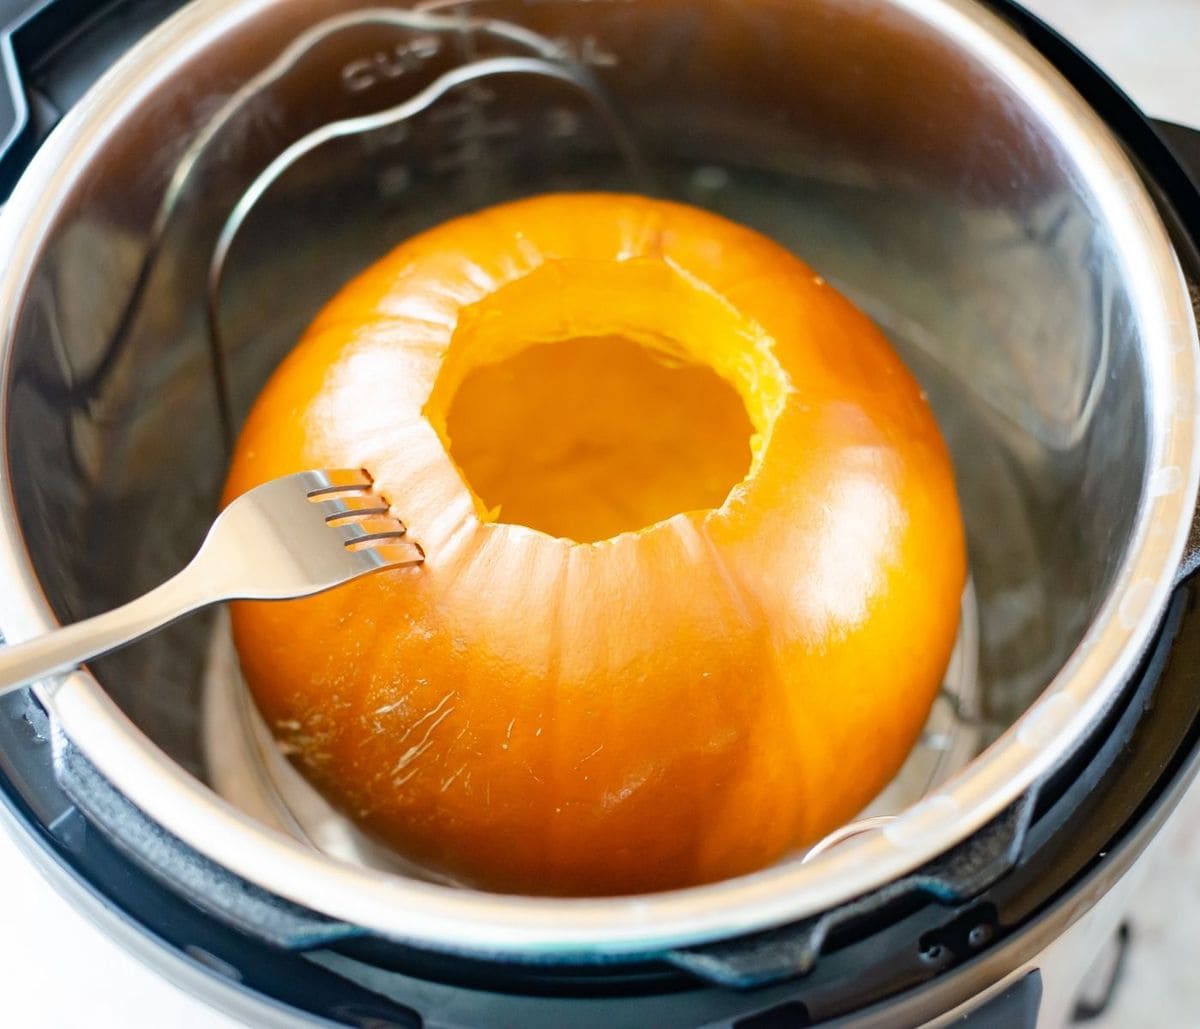 Piercing a pumpkin with a fork to see if it is cooked.